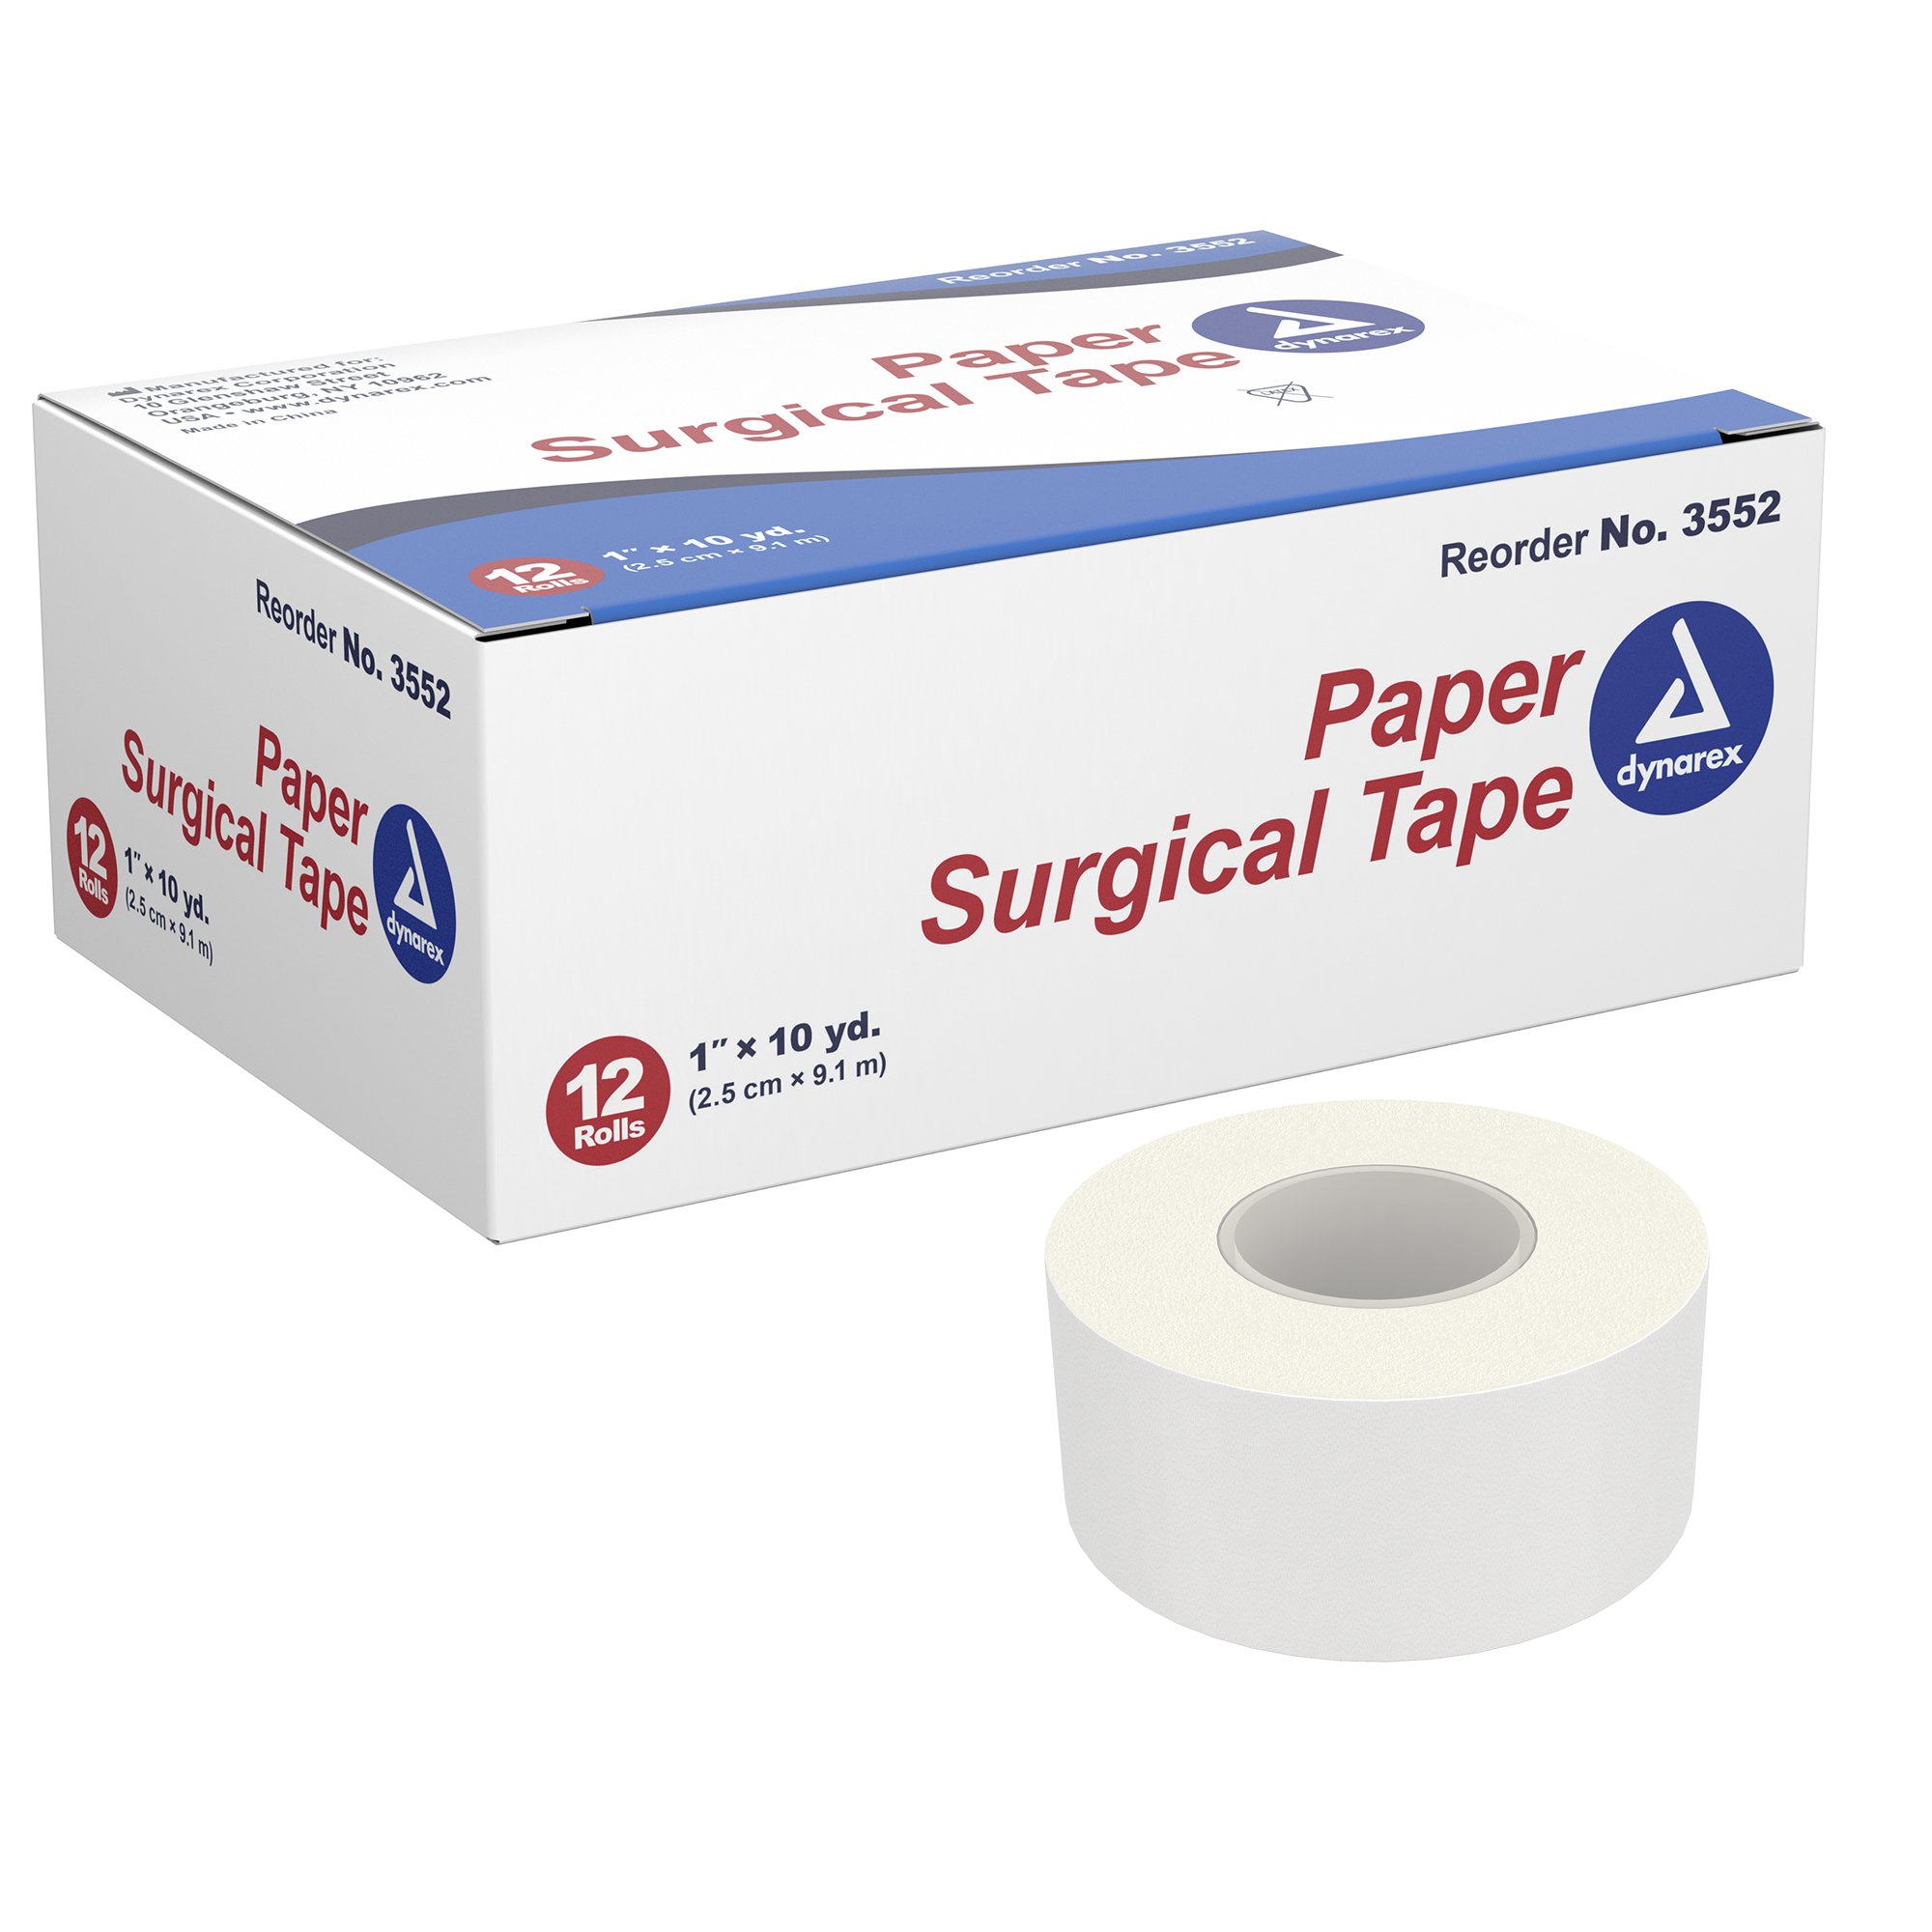 3M Micropore Paper Surgical Tape Standard Roll 3 X 10Yard, 4/bx